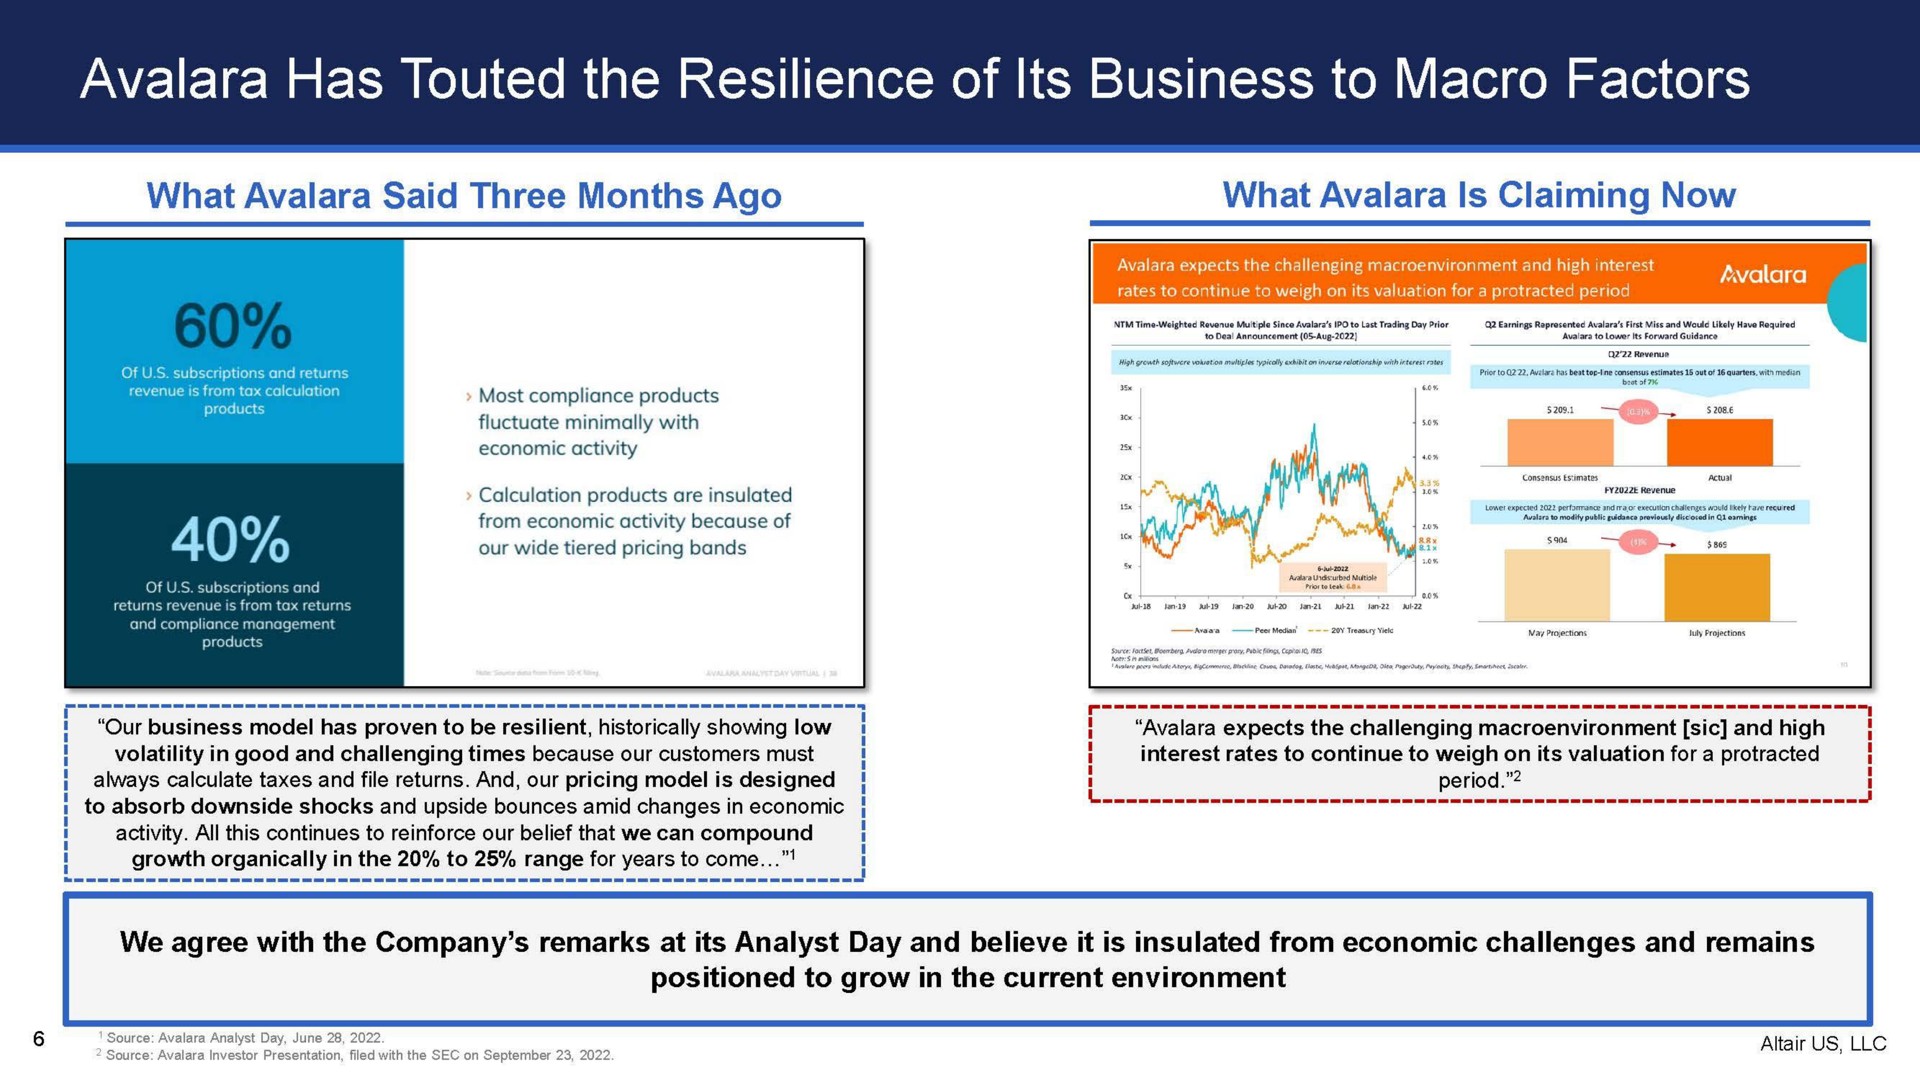 what said three months ago has touted the resilience of its business to macro factors what is claiming now | Altair US LLC